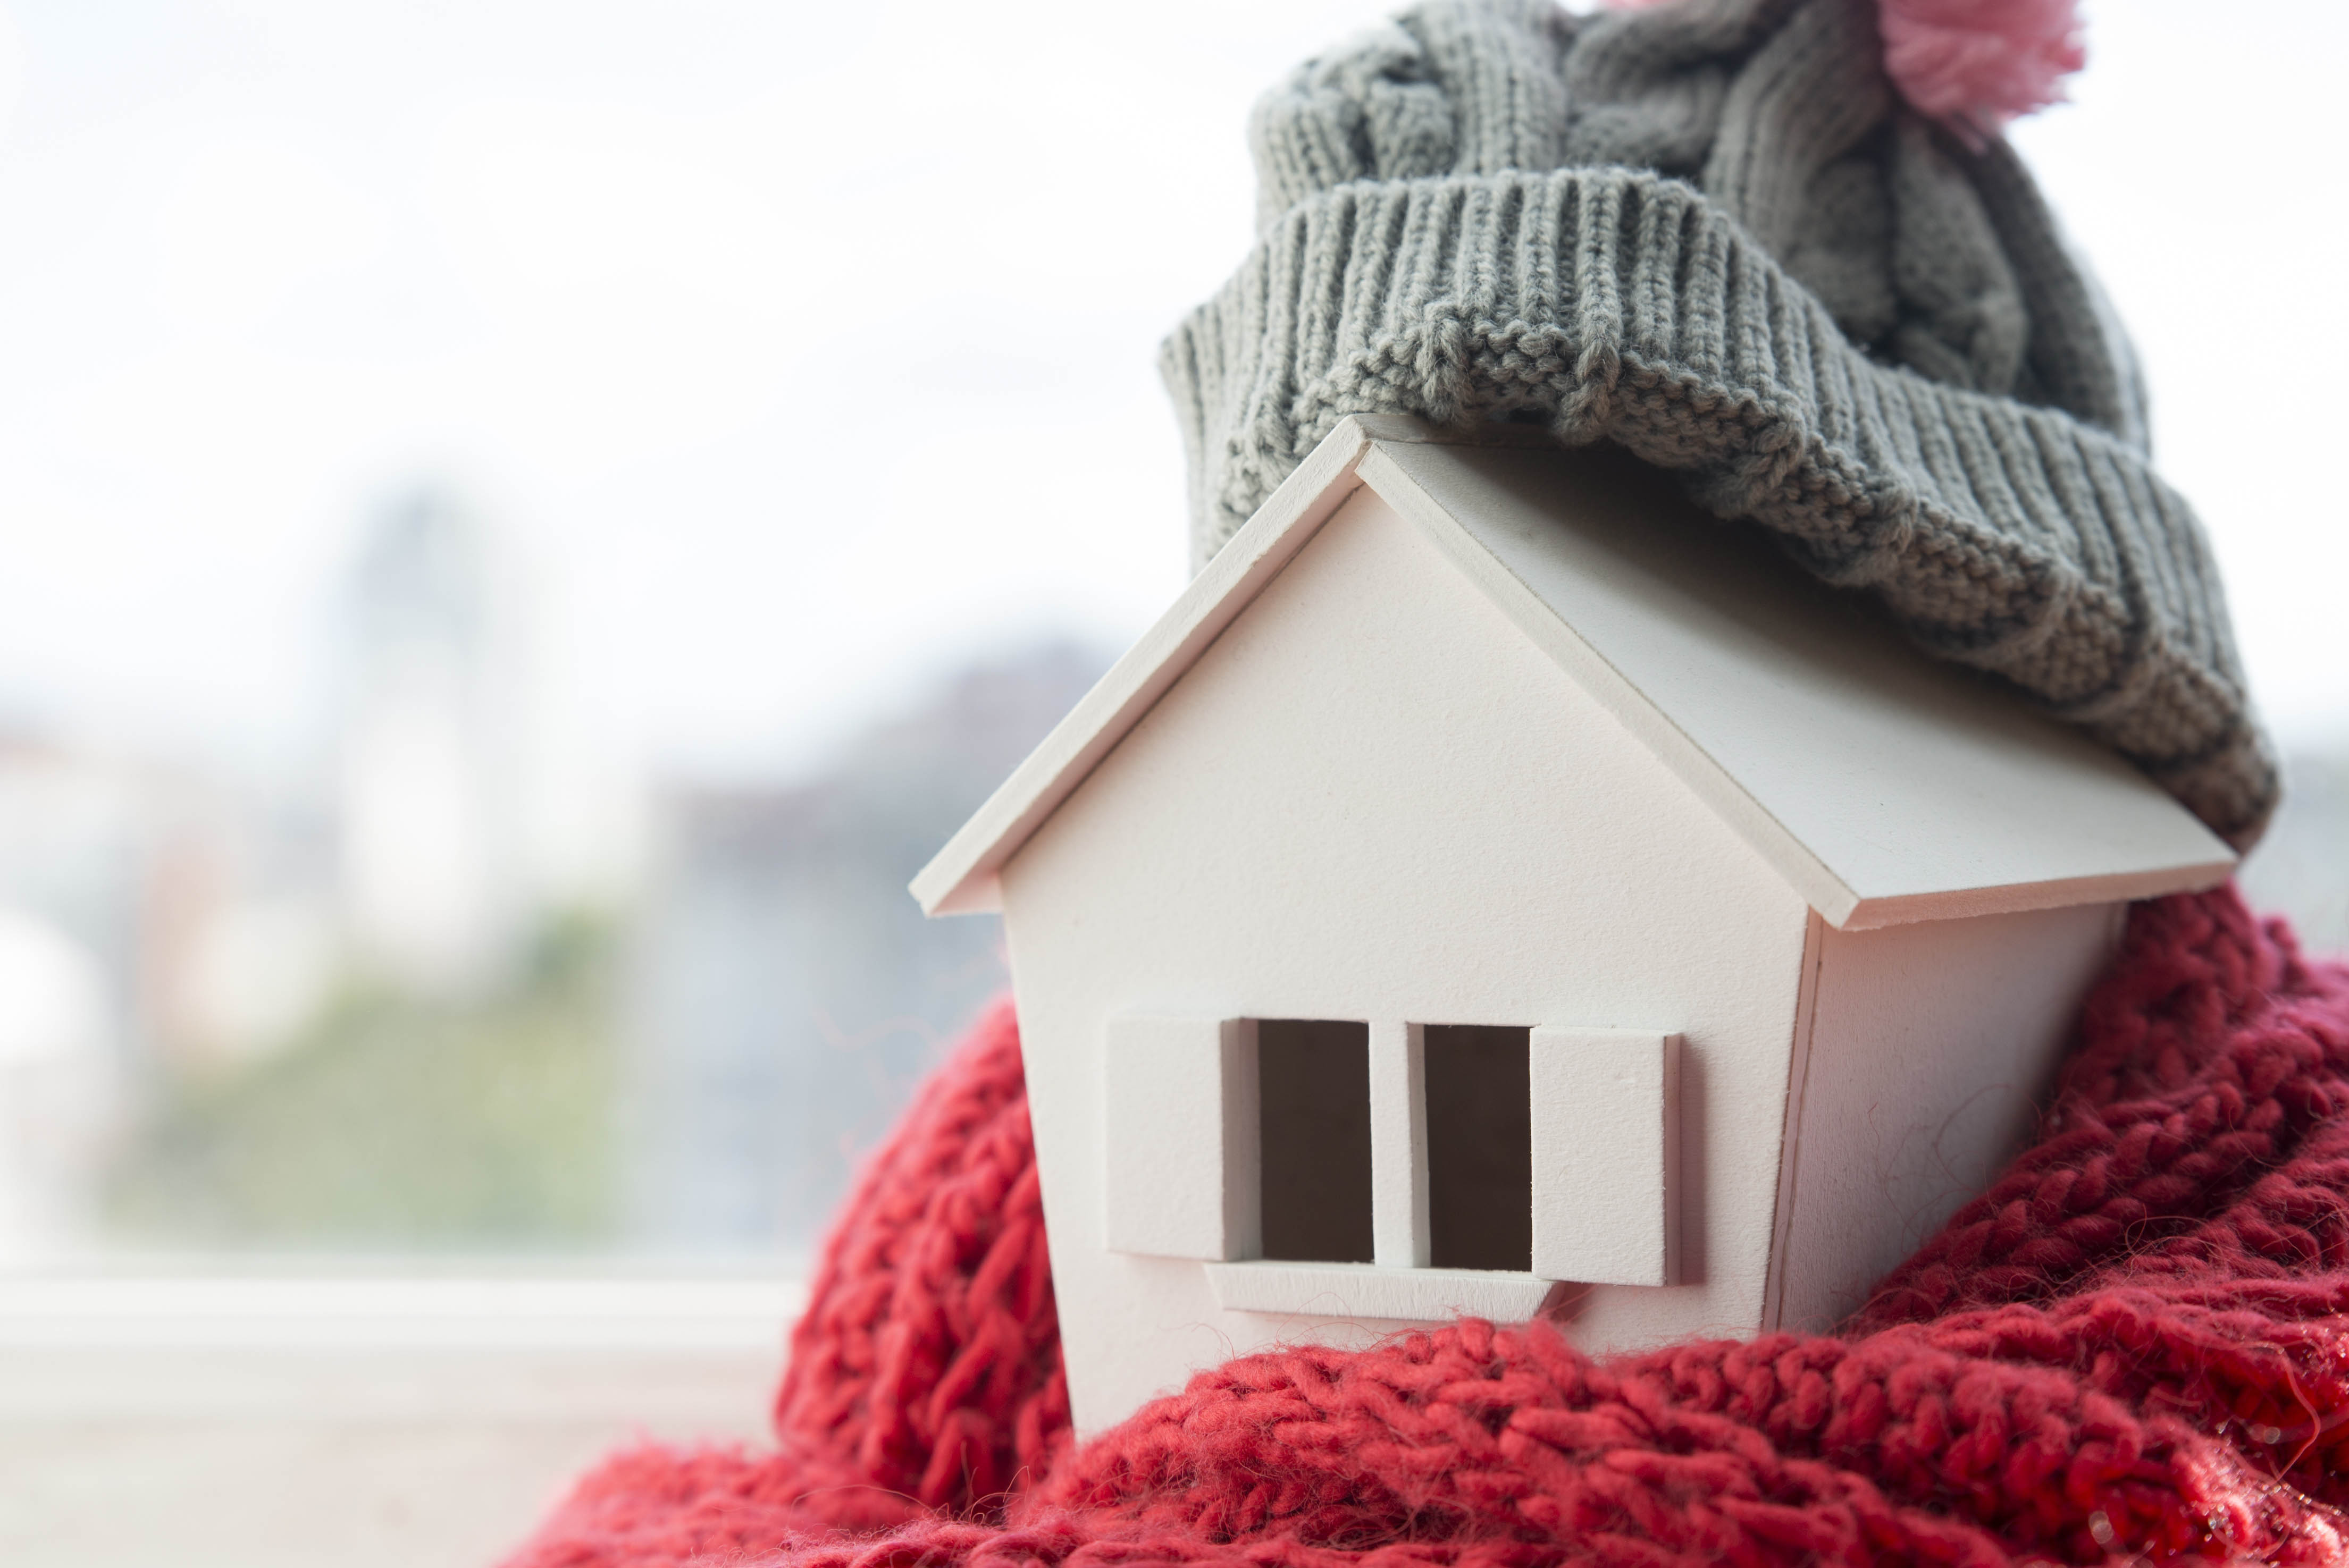 Heating your home while saving money